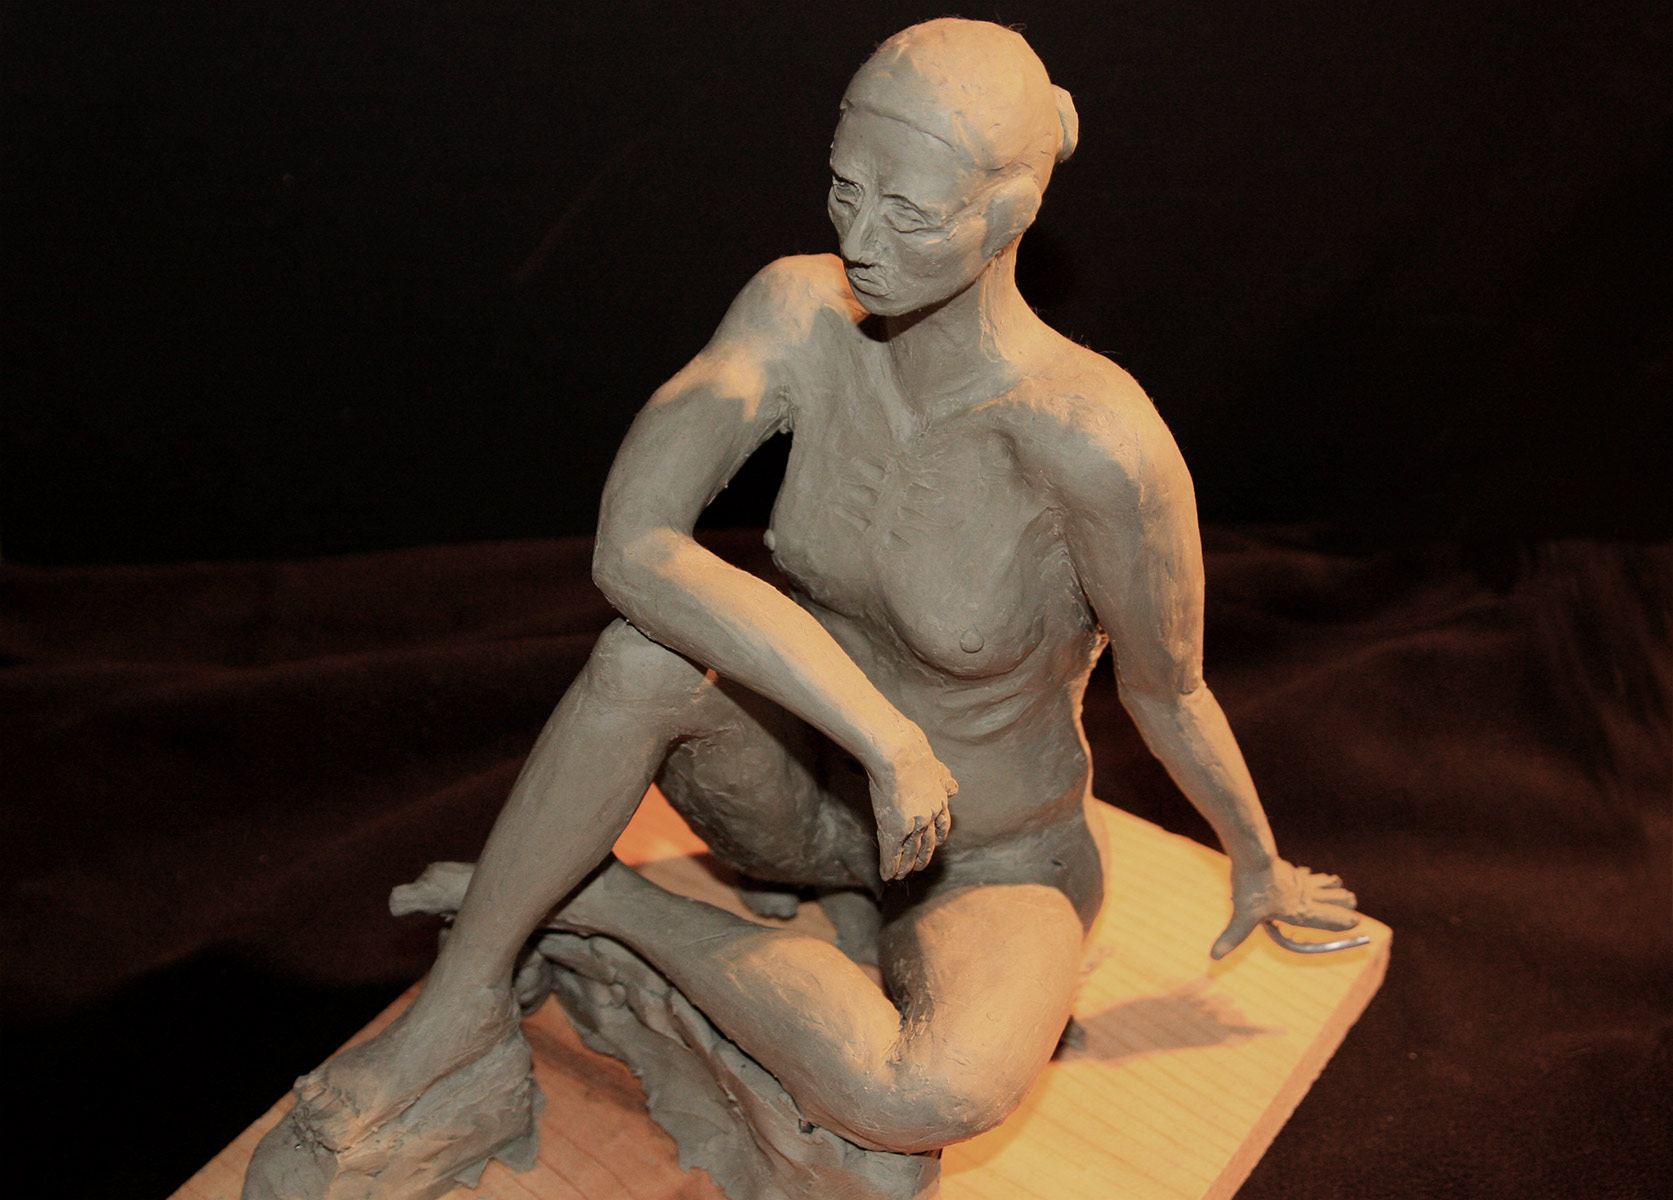 8" tall clay model from life